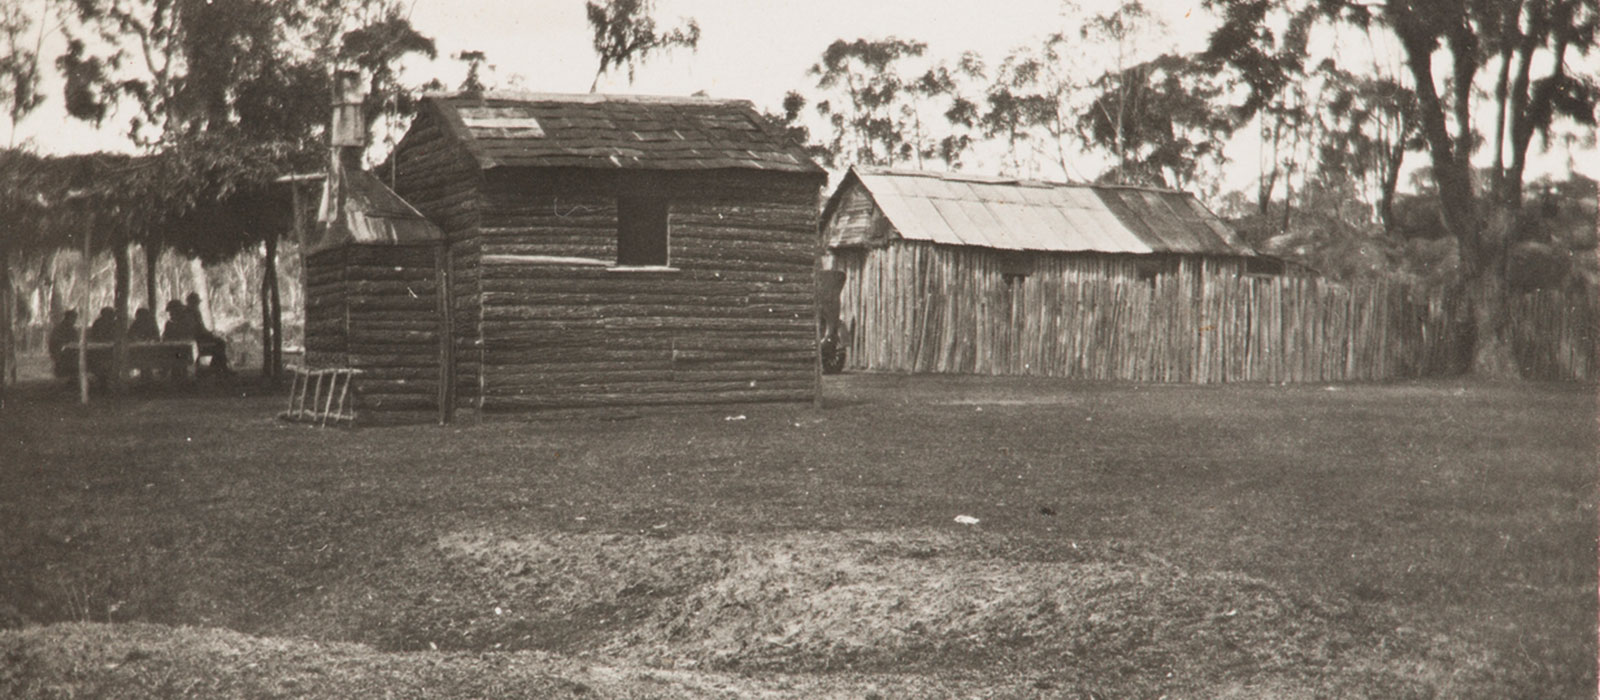 Historic black and white photo of log cabins and a group of people sitting under a shelter in the Australian bush.